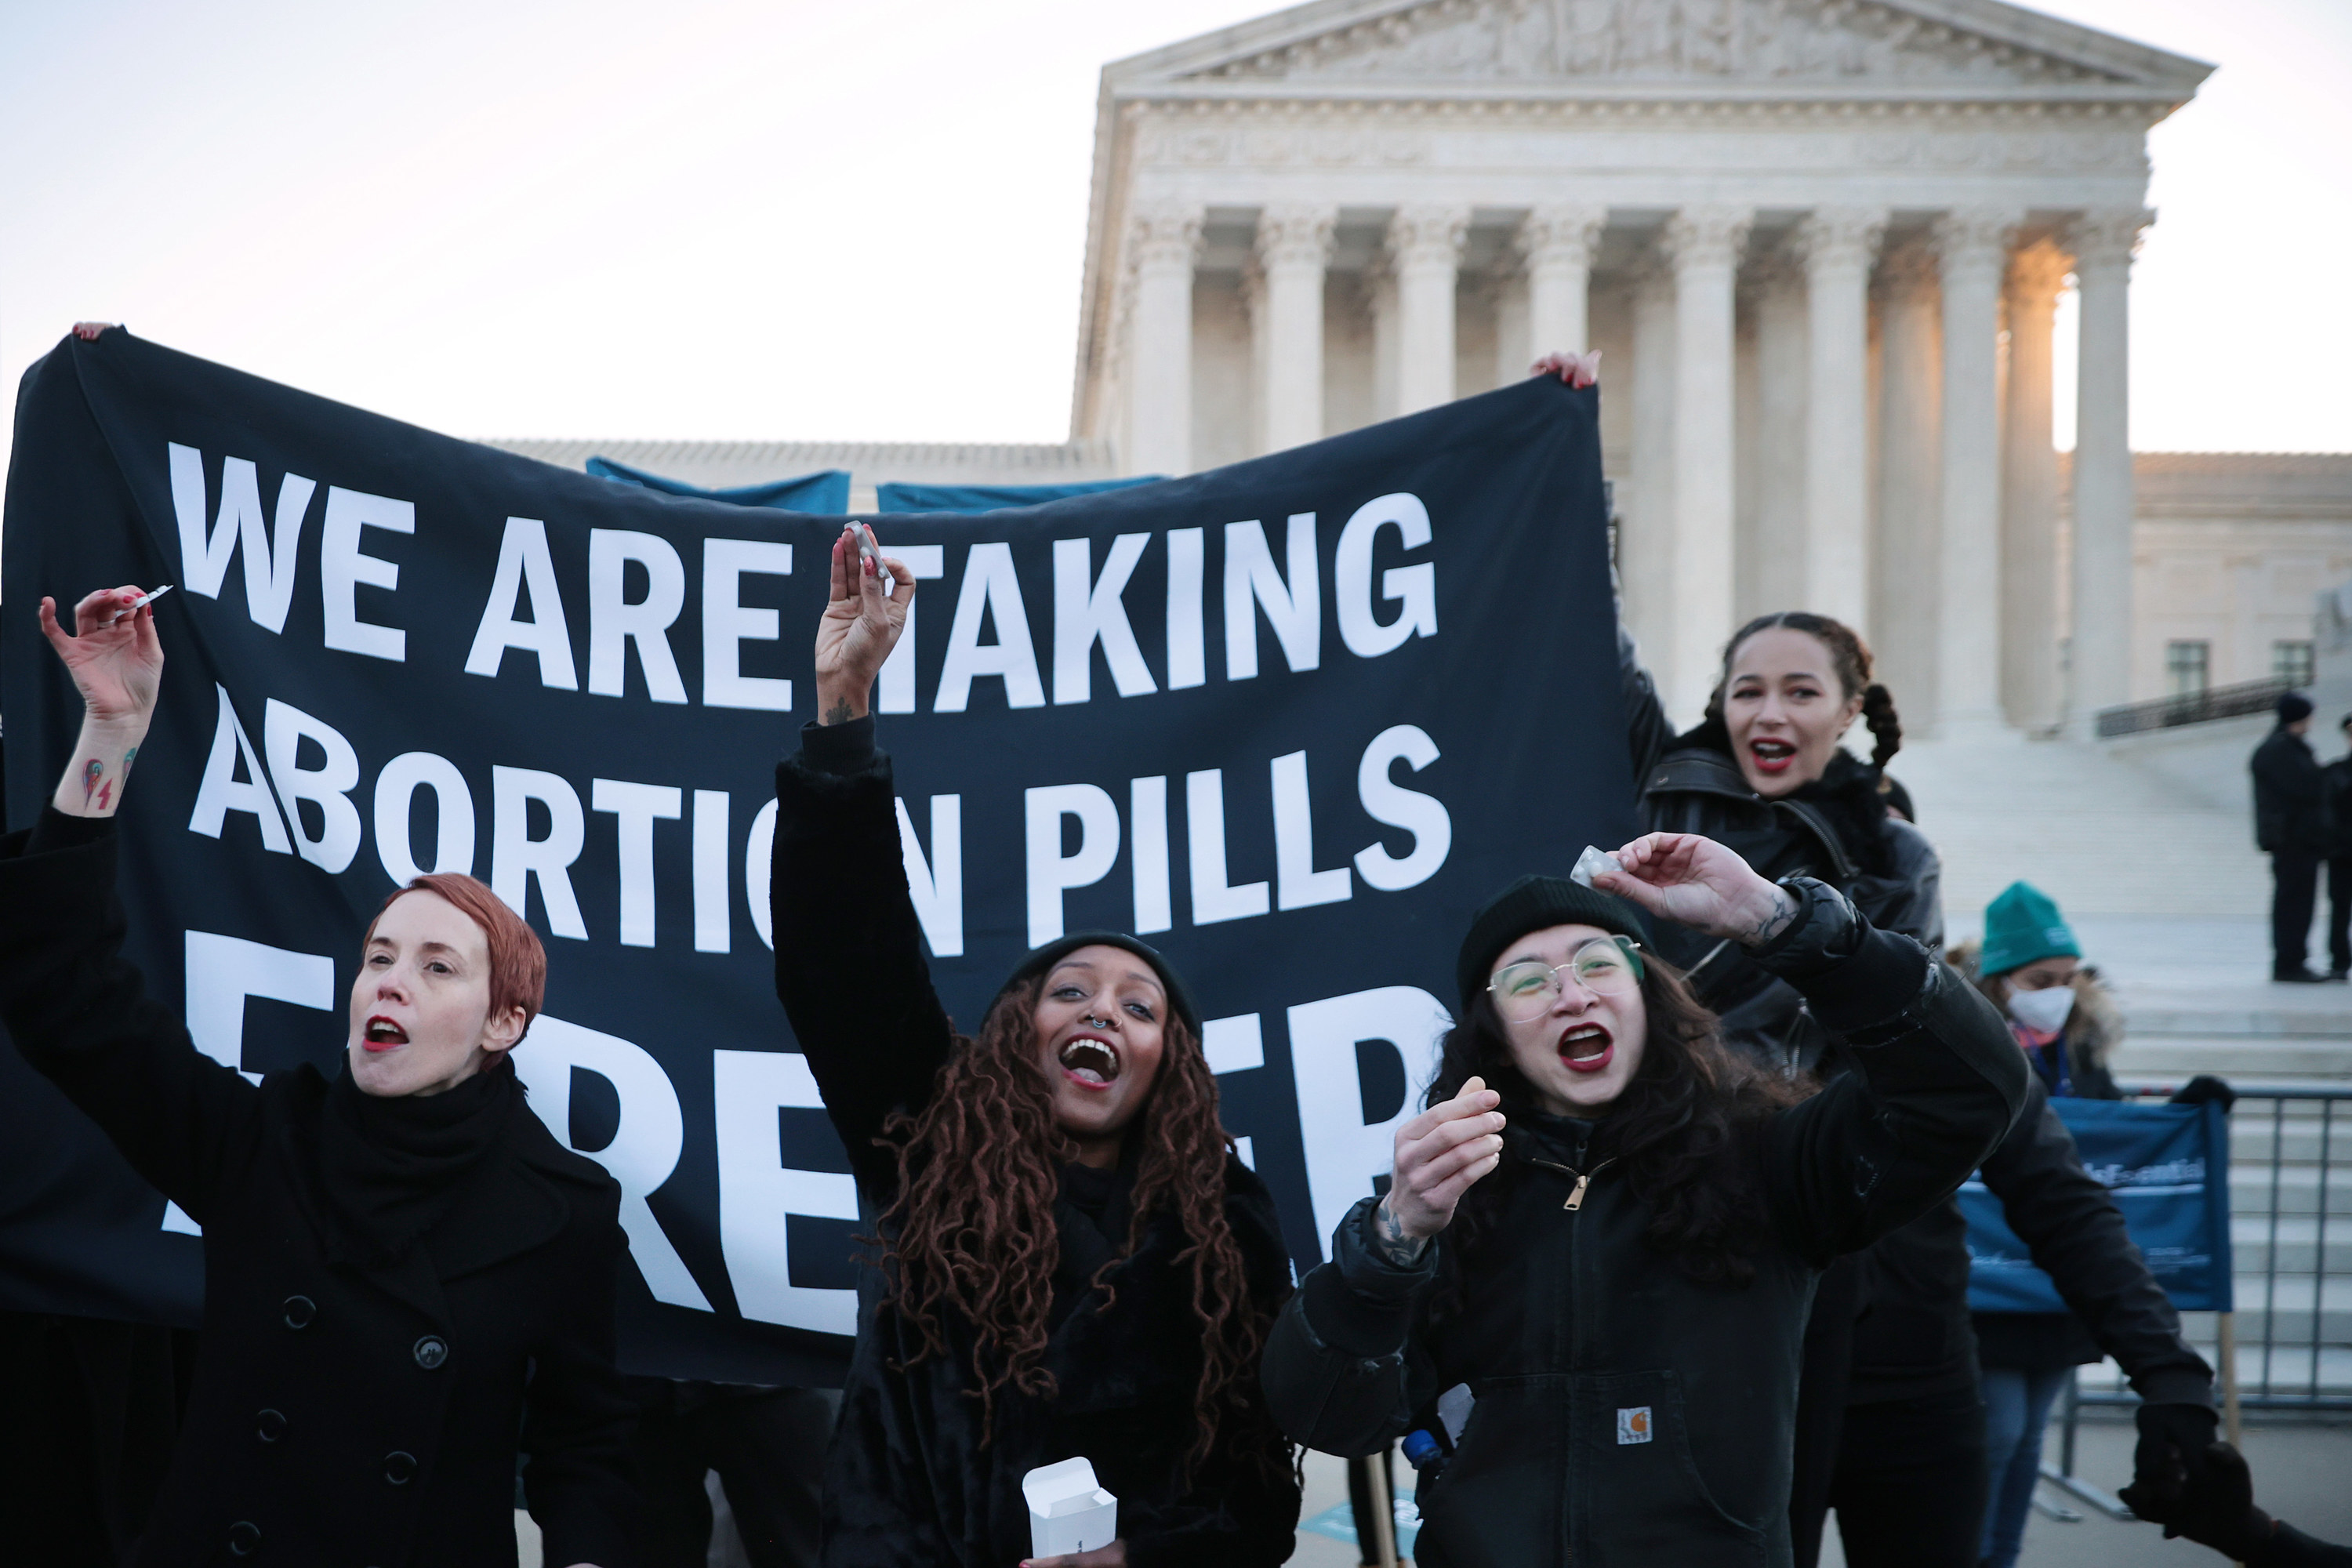 An image of protestors with a sign saying &quot;We are taking abortion pills forever&quot;